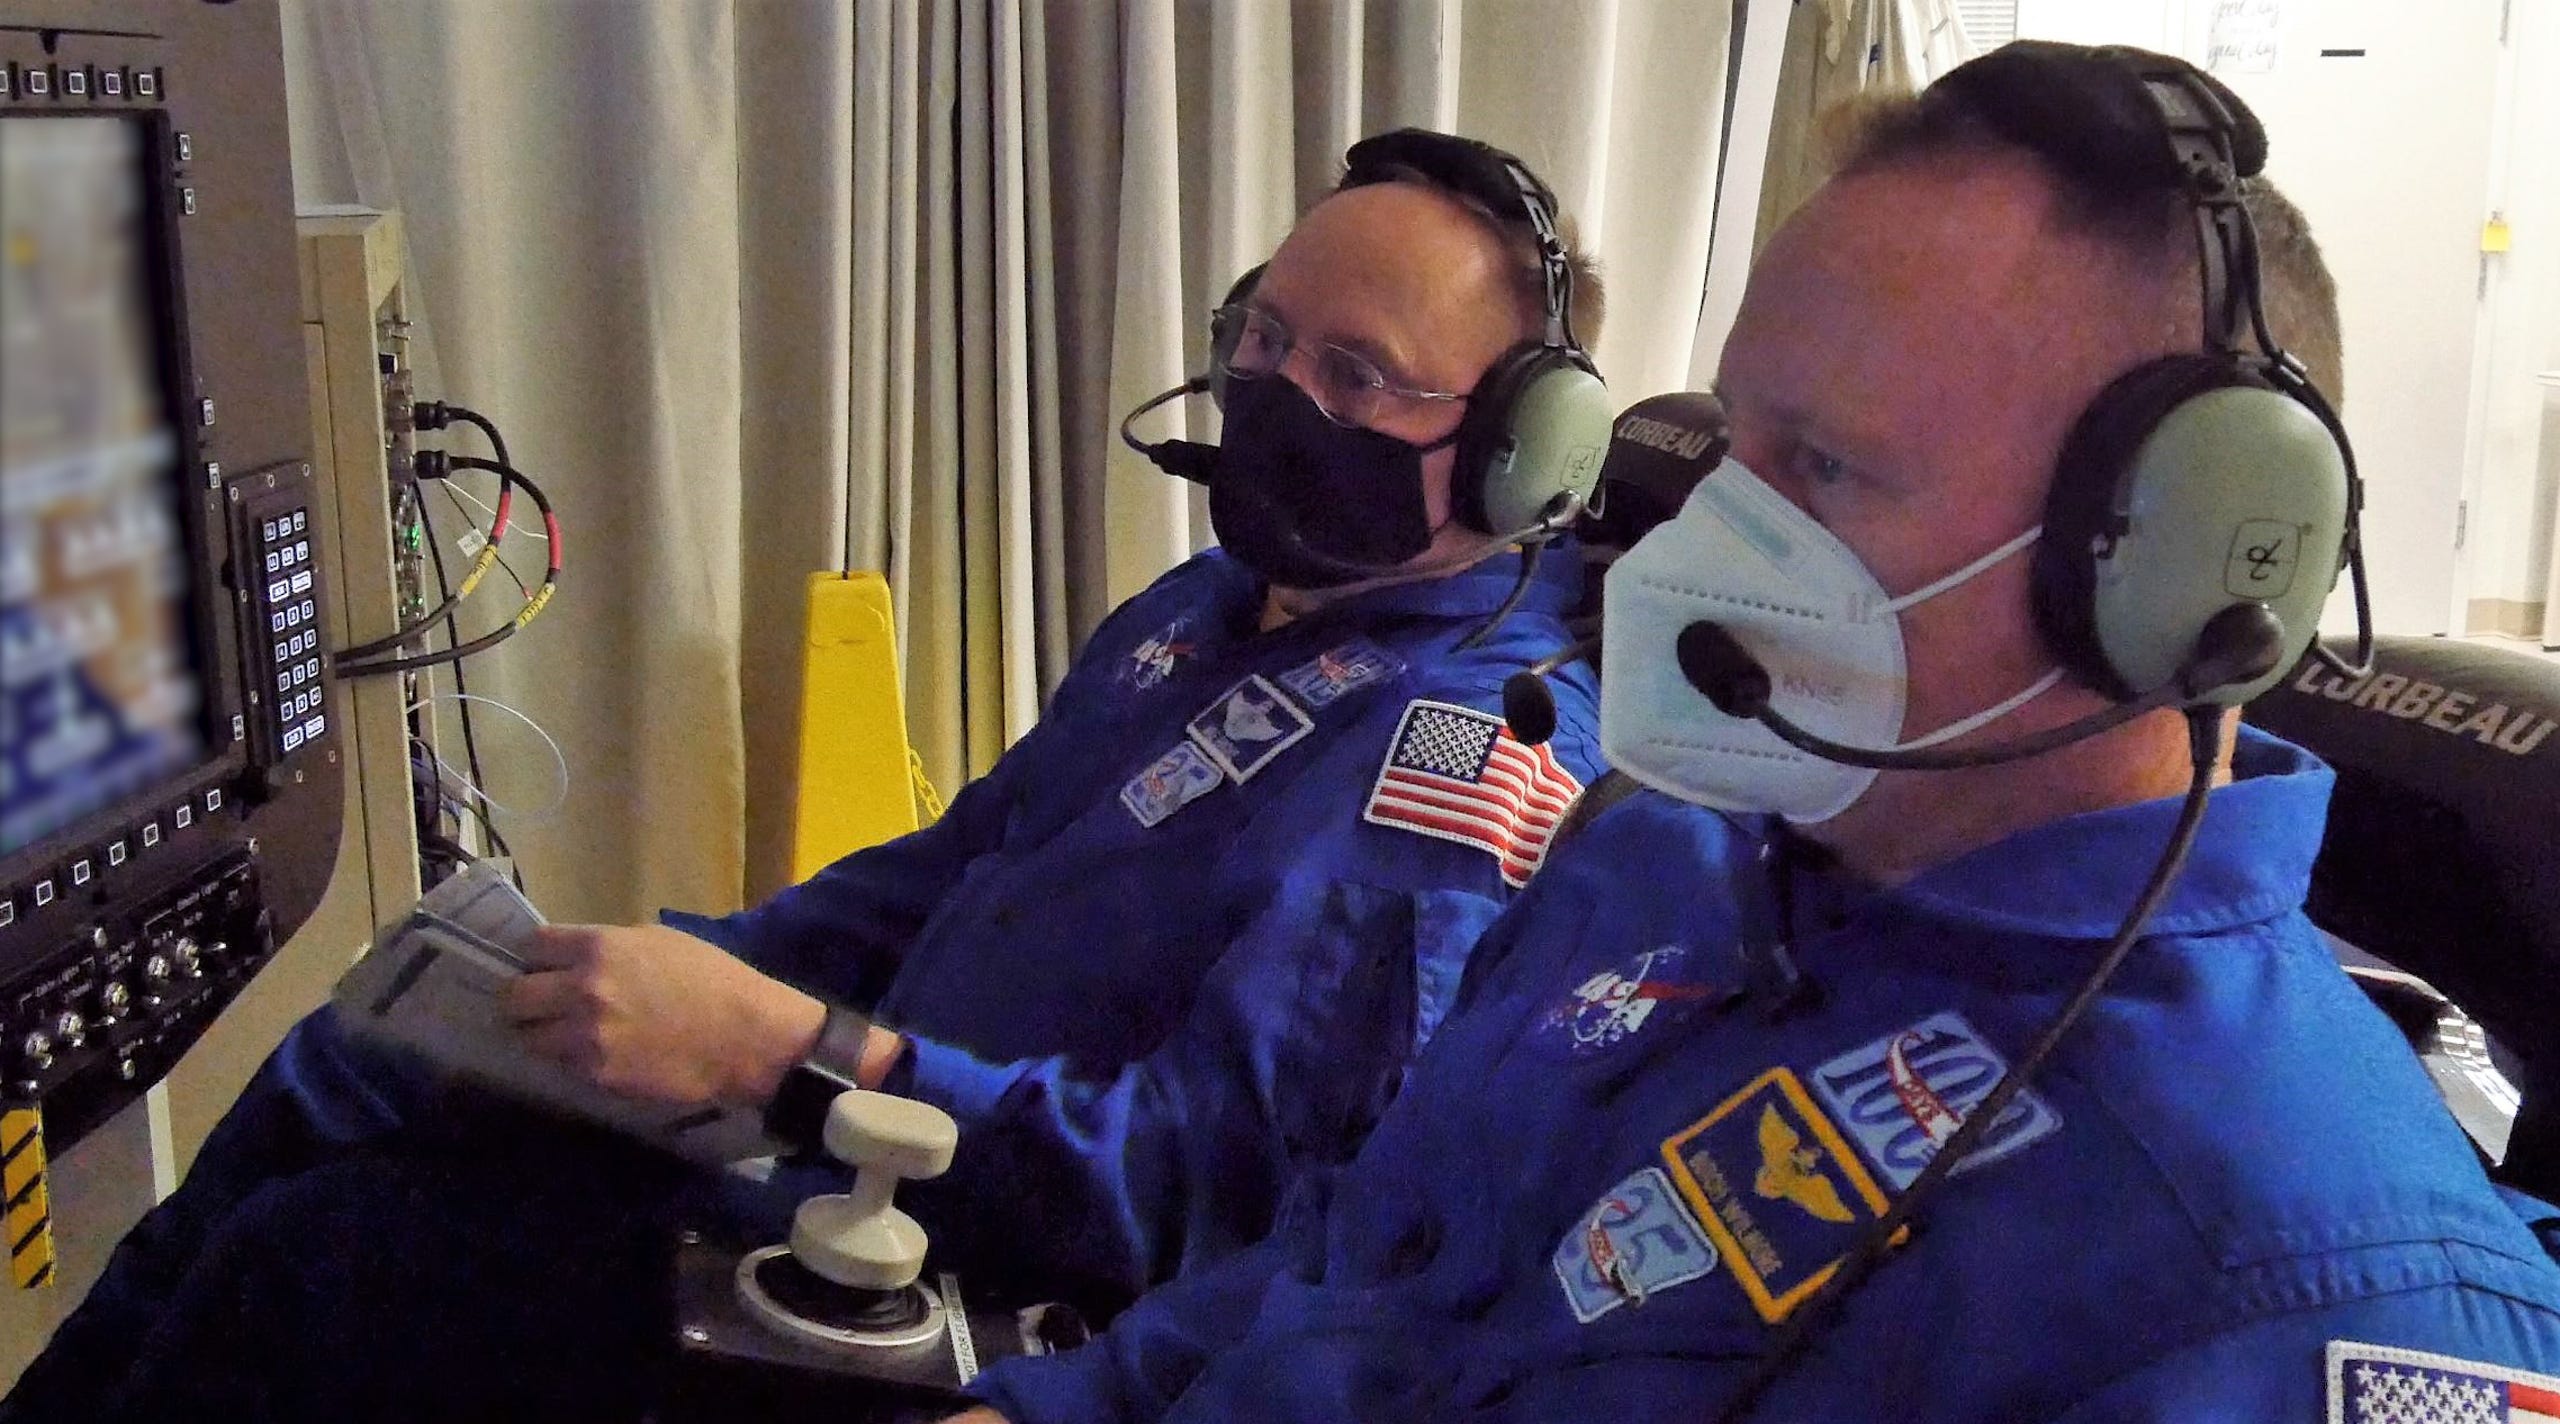 NASA astronauts Barry “Butch” Wilmore and Mike Fincke, who will fly aboard Starliner’s Crew Flight Test mission, monitor the launch portion of Boeing’s simulated Orbital Flight Test-2 mission.